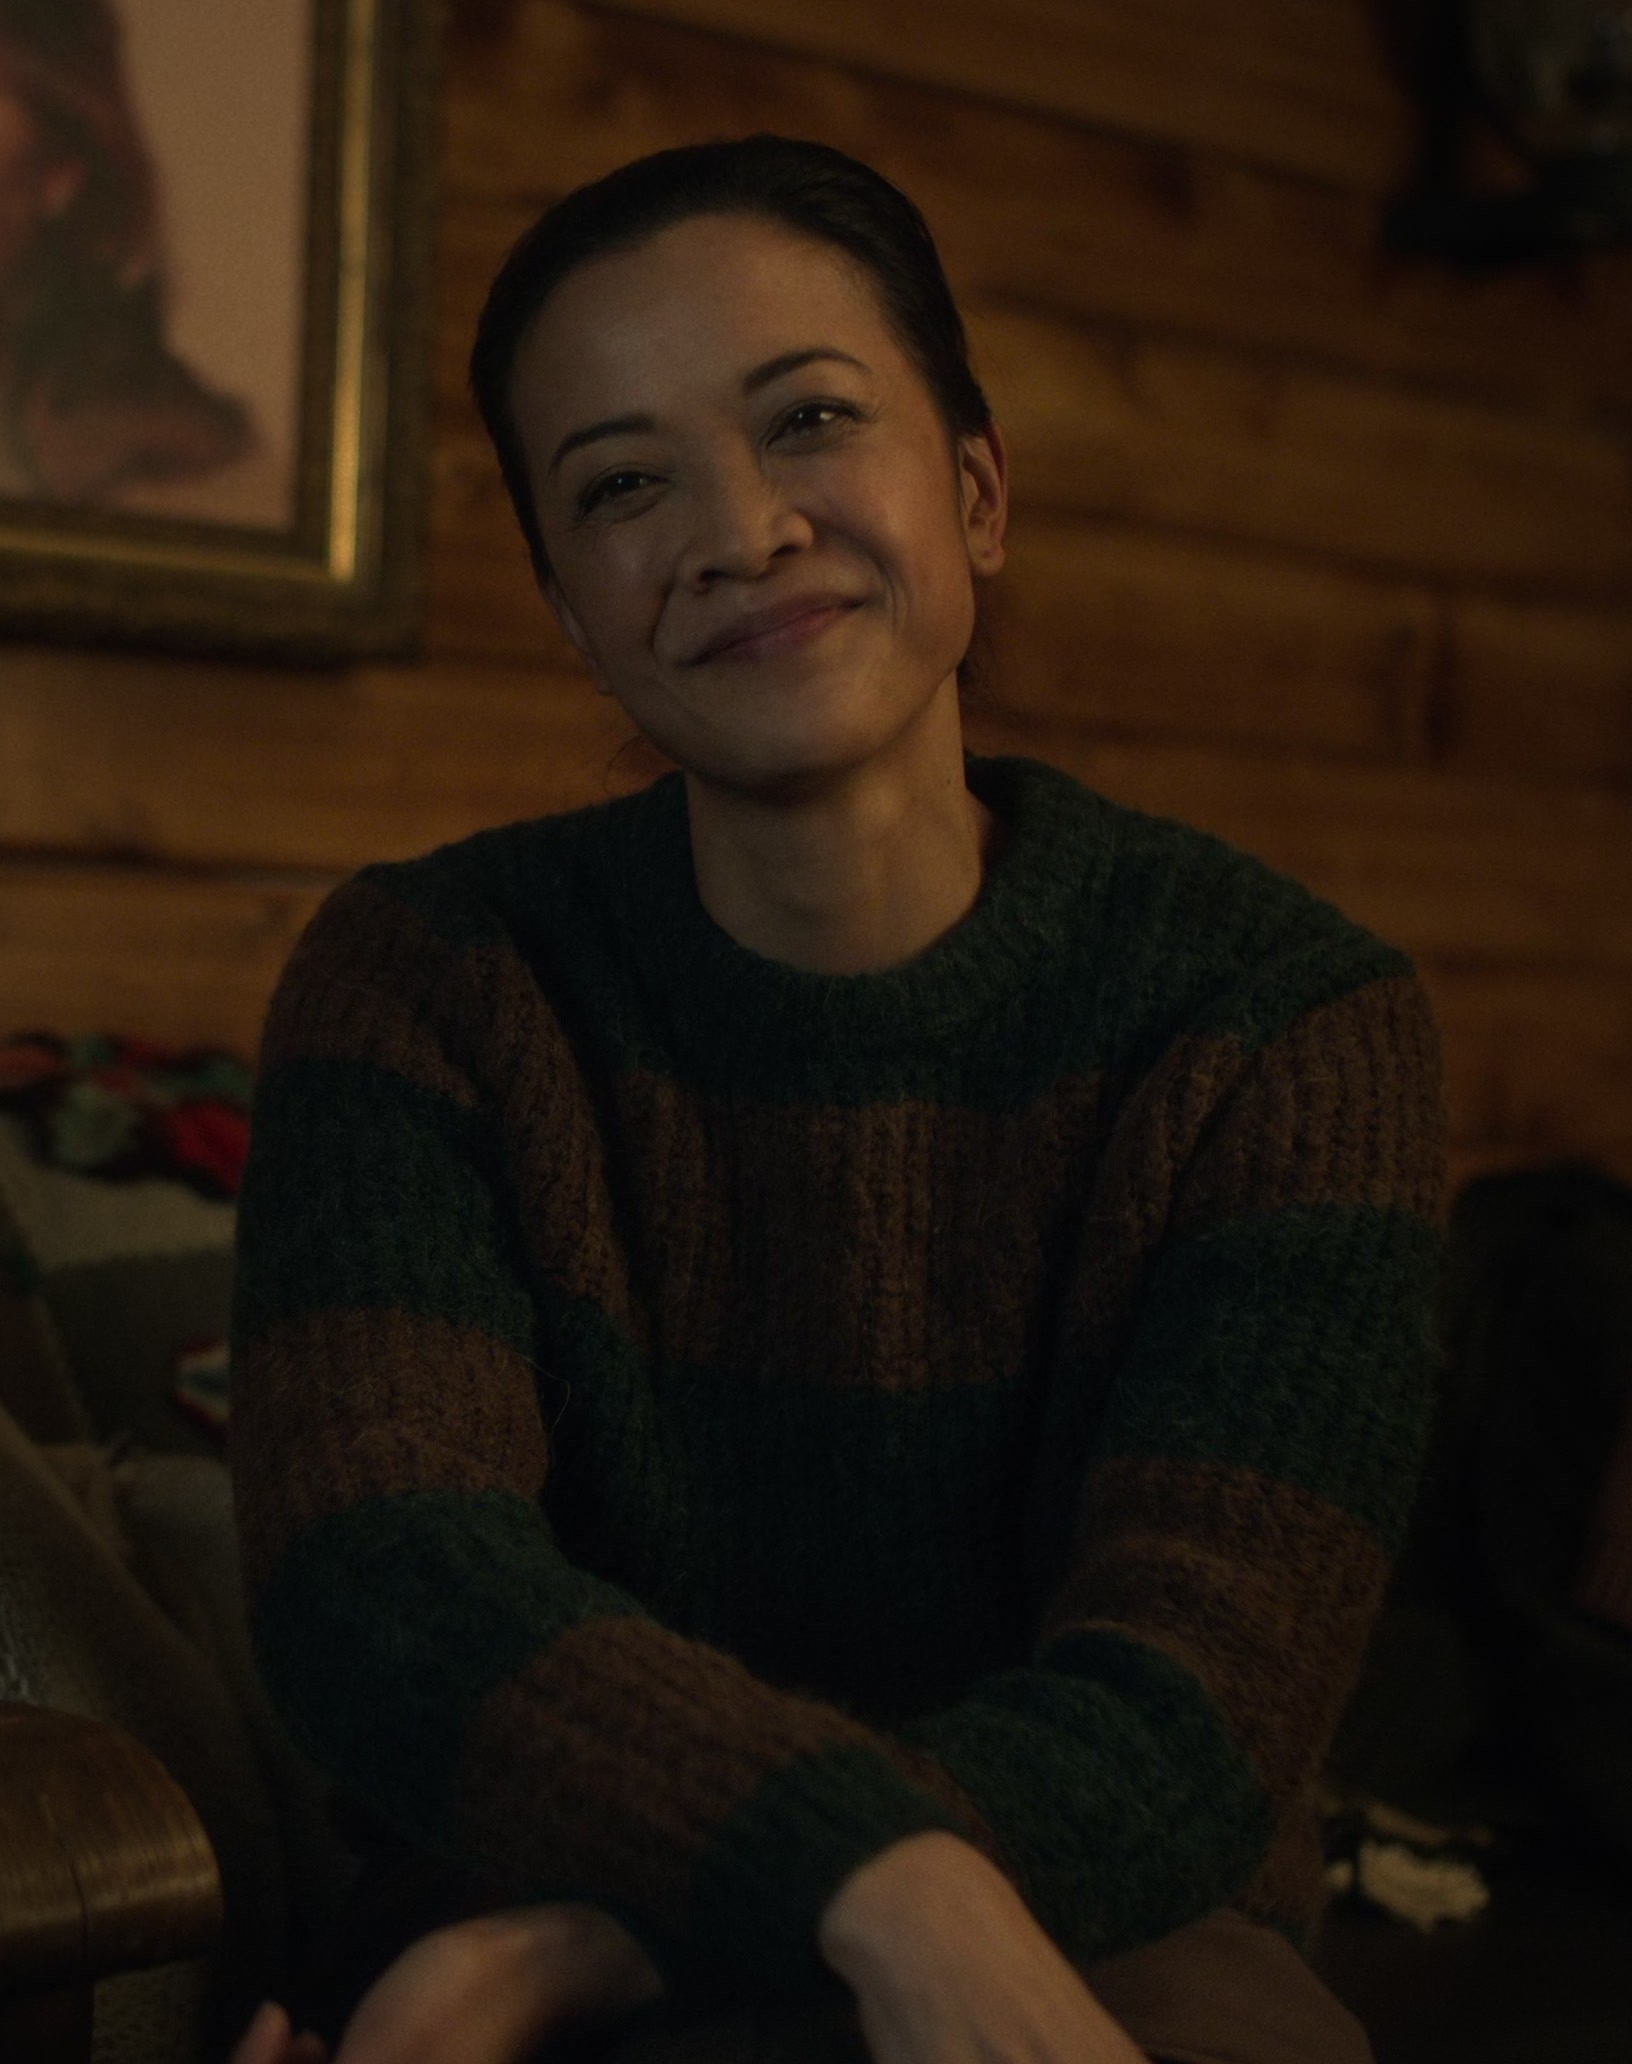 Worn on Fargo TV Show - Green and Brown Striped Knit Sweater Worn by Sorika Horng